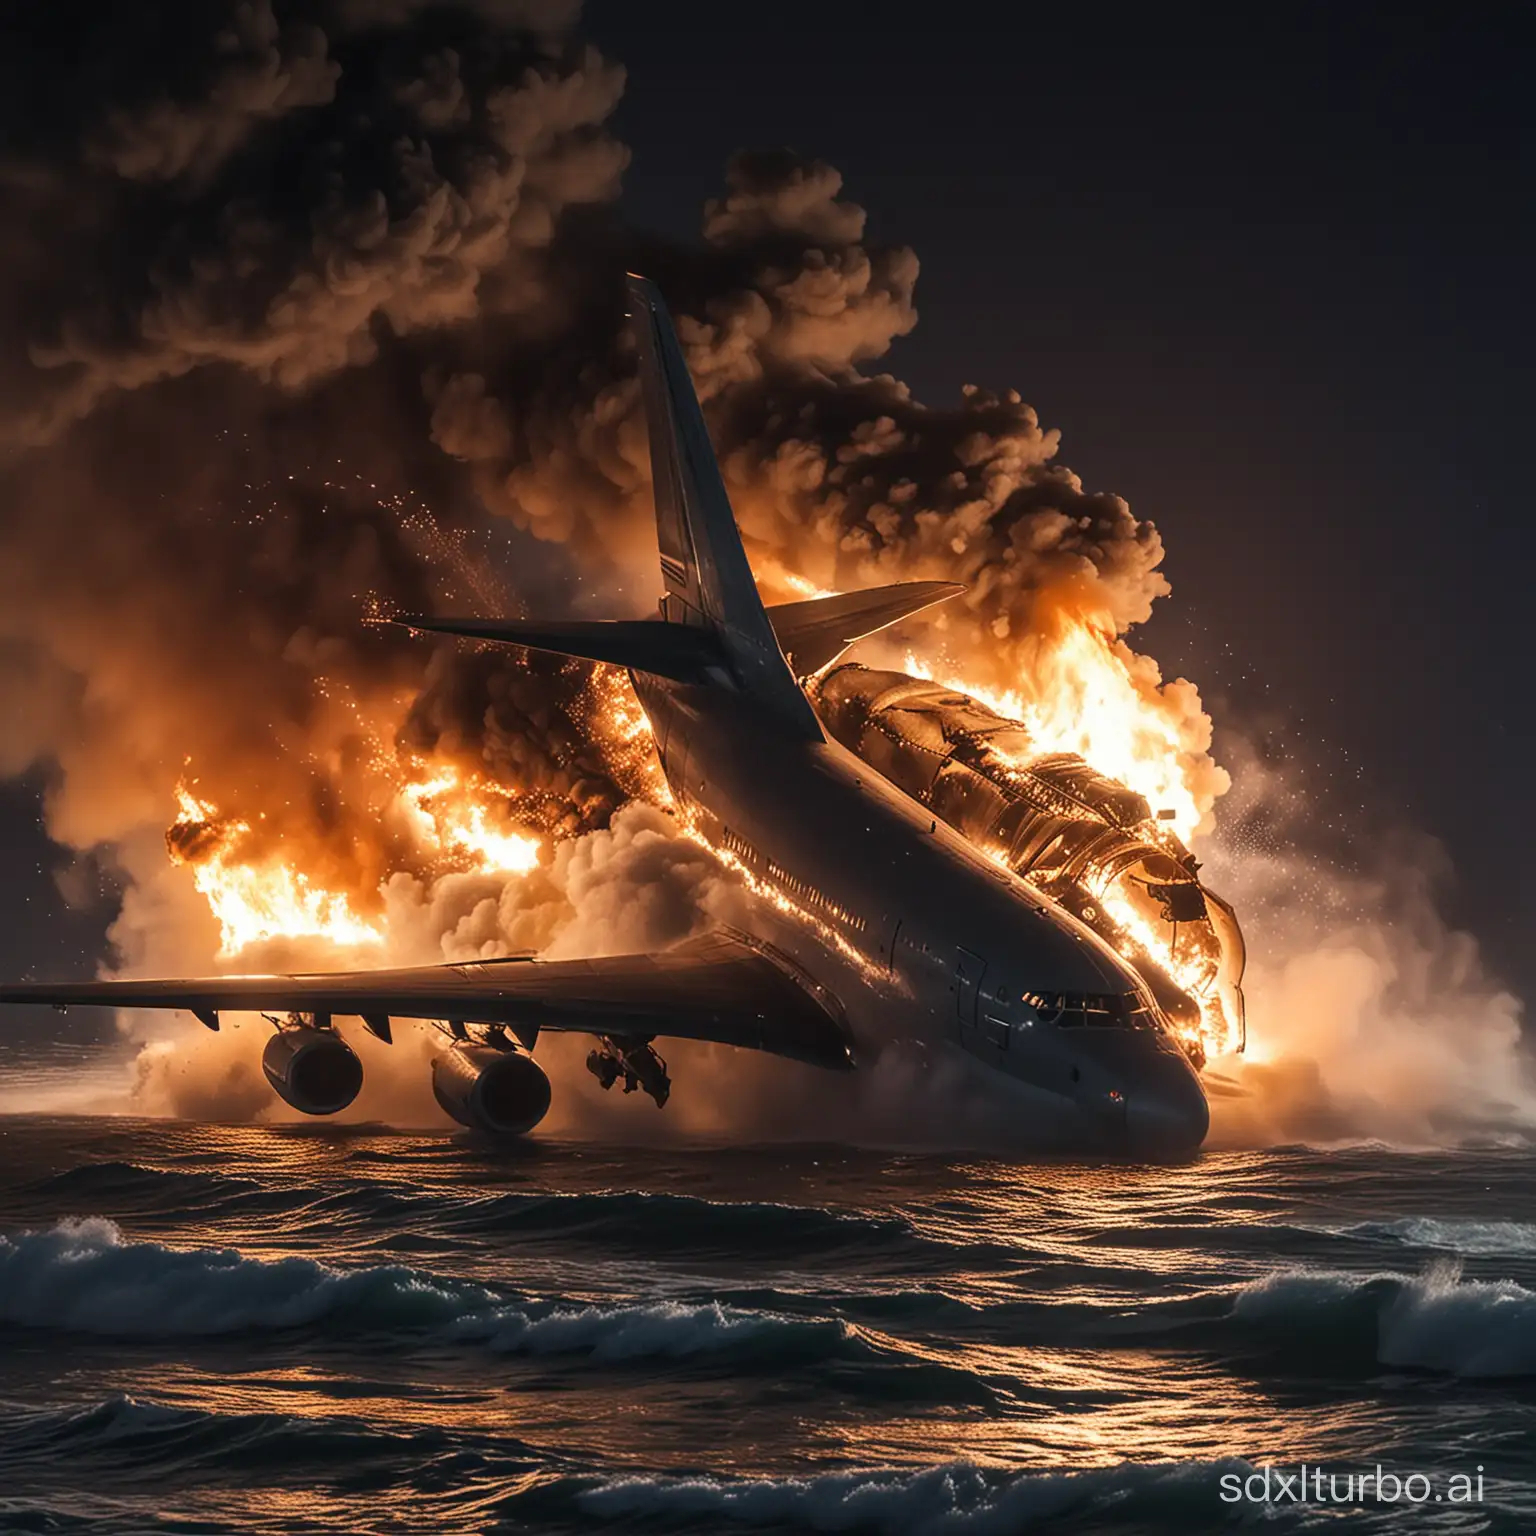 The jet engine of the plane that has falaing on sea up in night time breaks down and catches fire. Then the whole side collapses and the plane loses its direction.